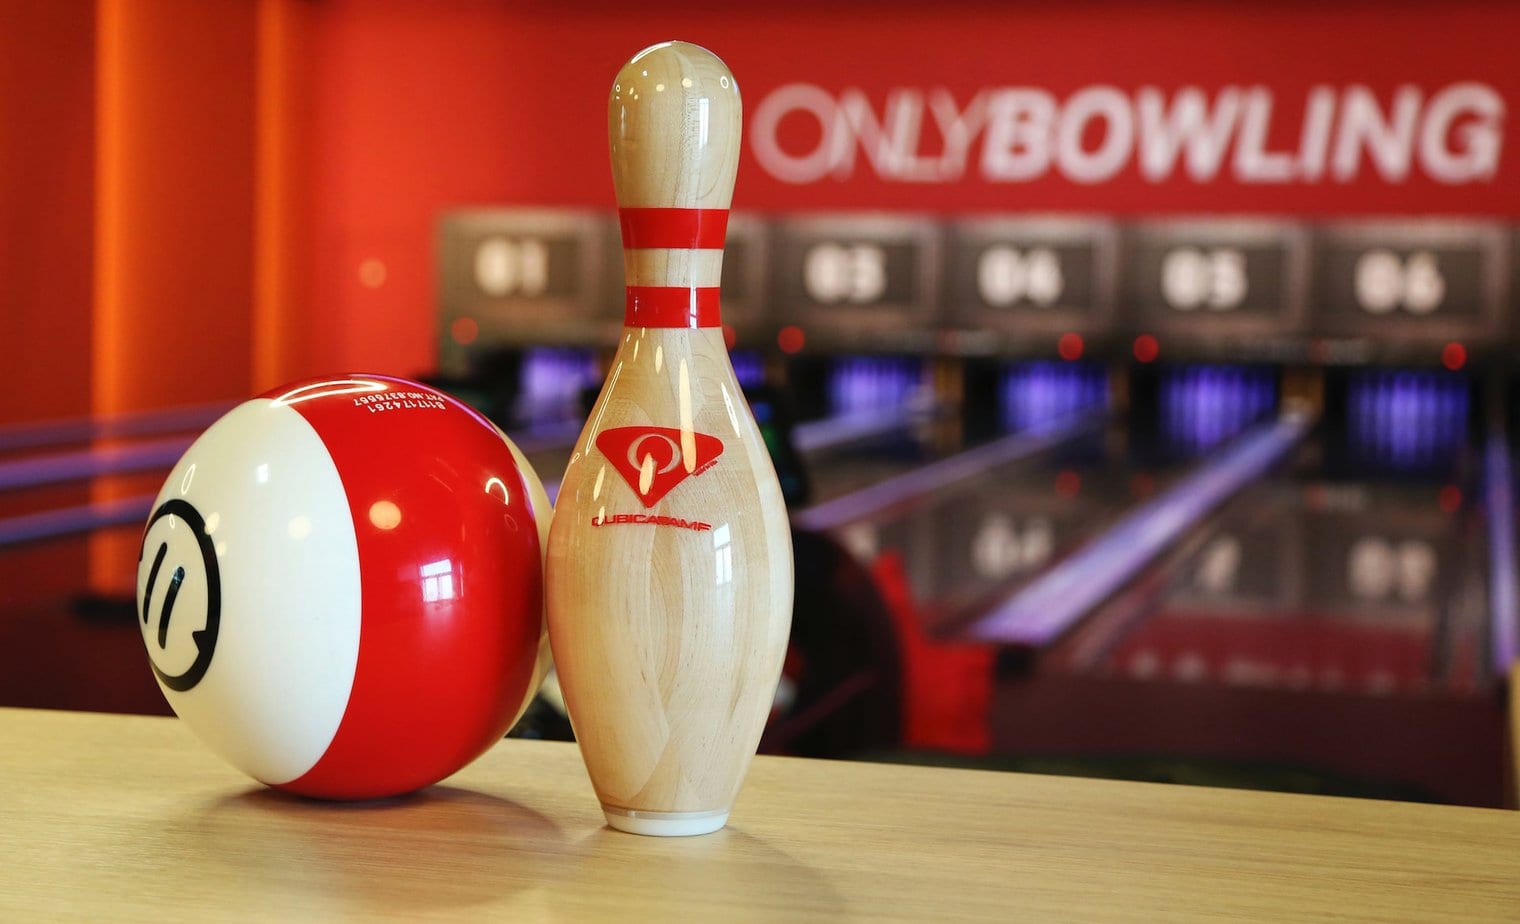 How to avoid foul play while bowling?